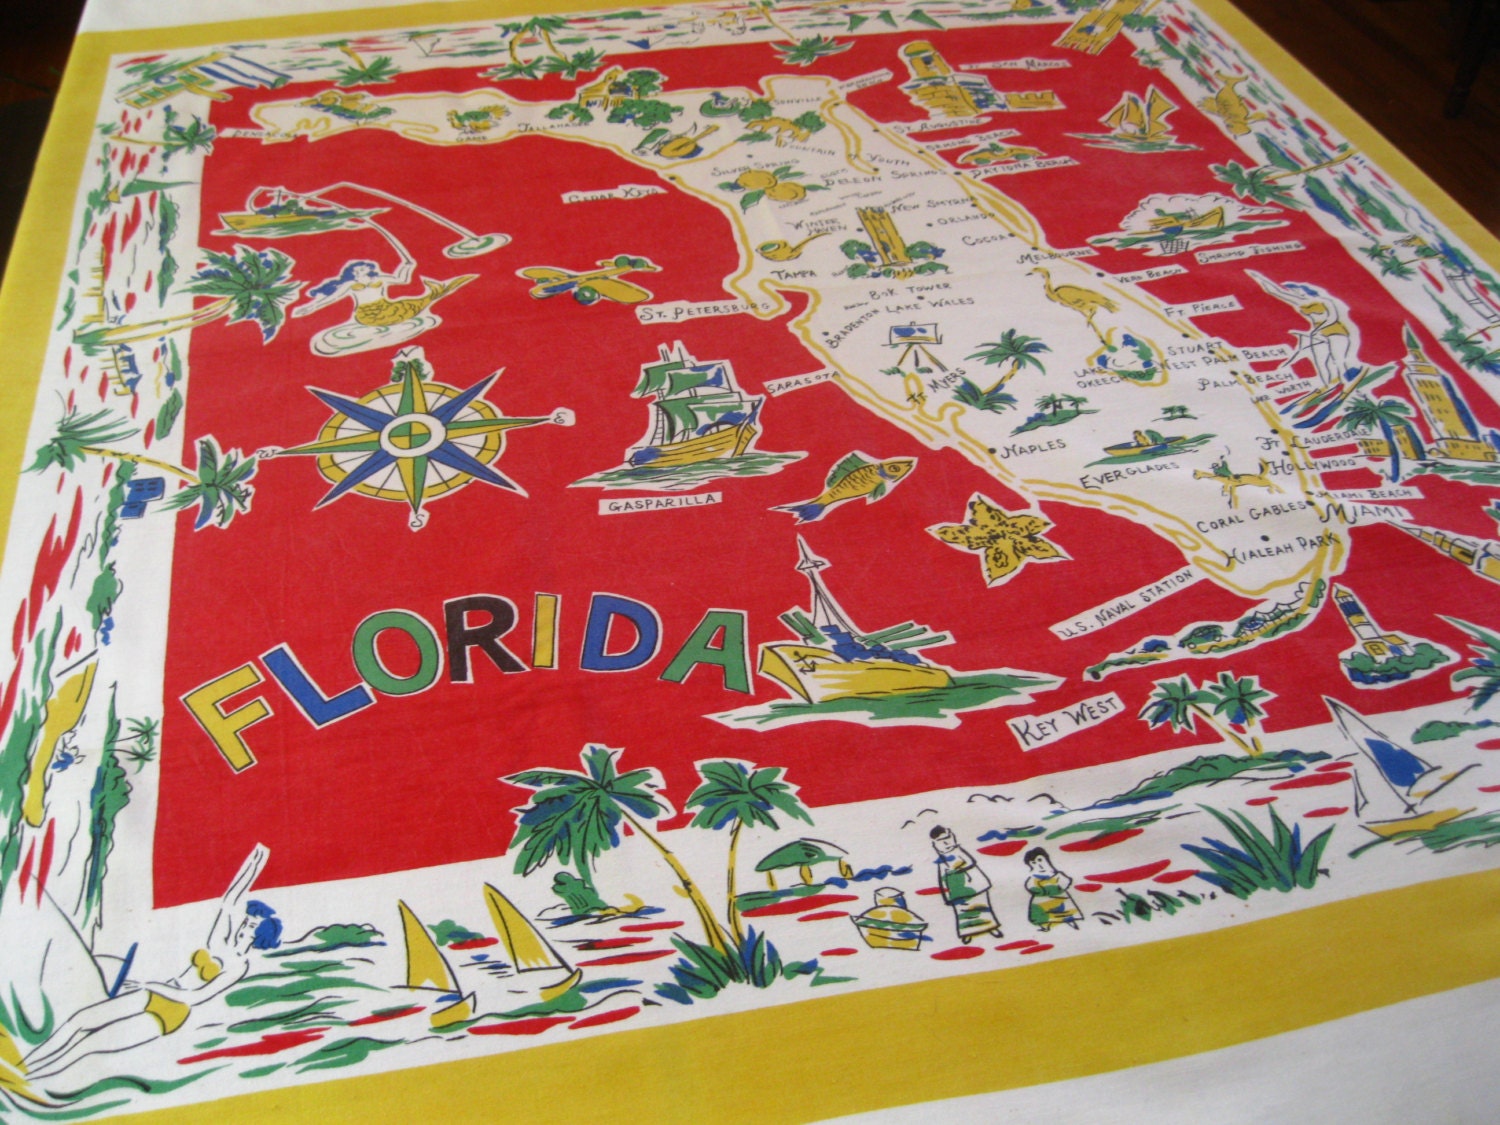 Vintage Florida tablecloth with flamingos, palm trees and bathing beauties  - 1950s